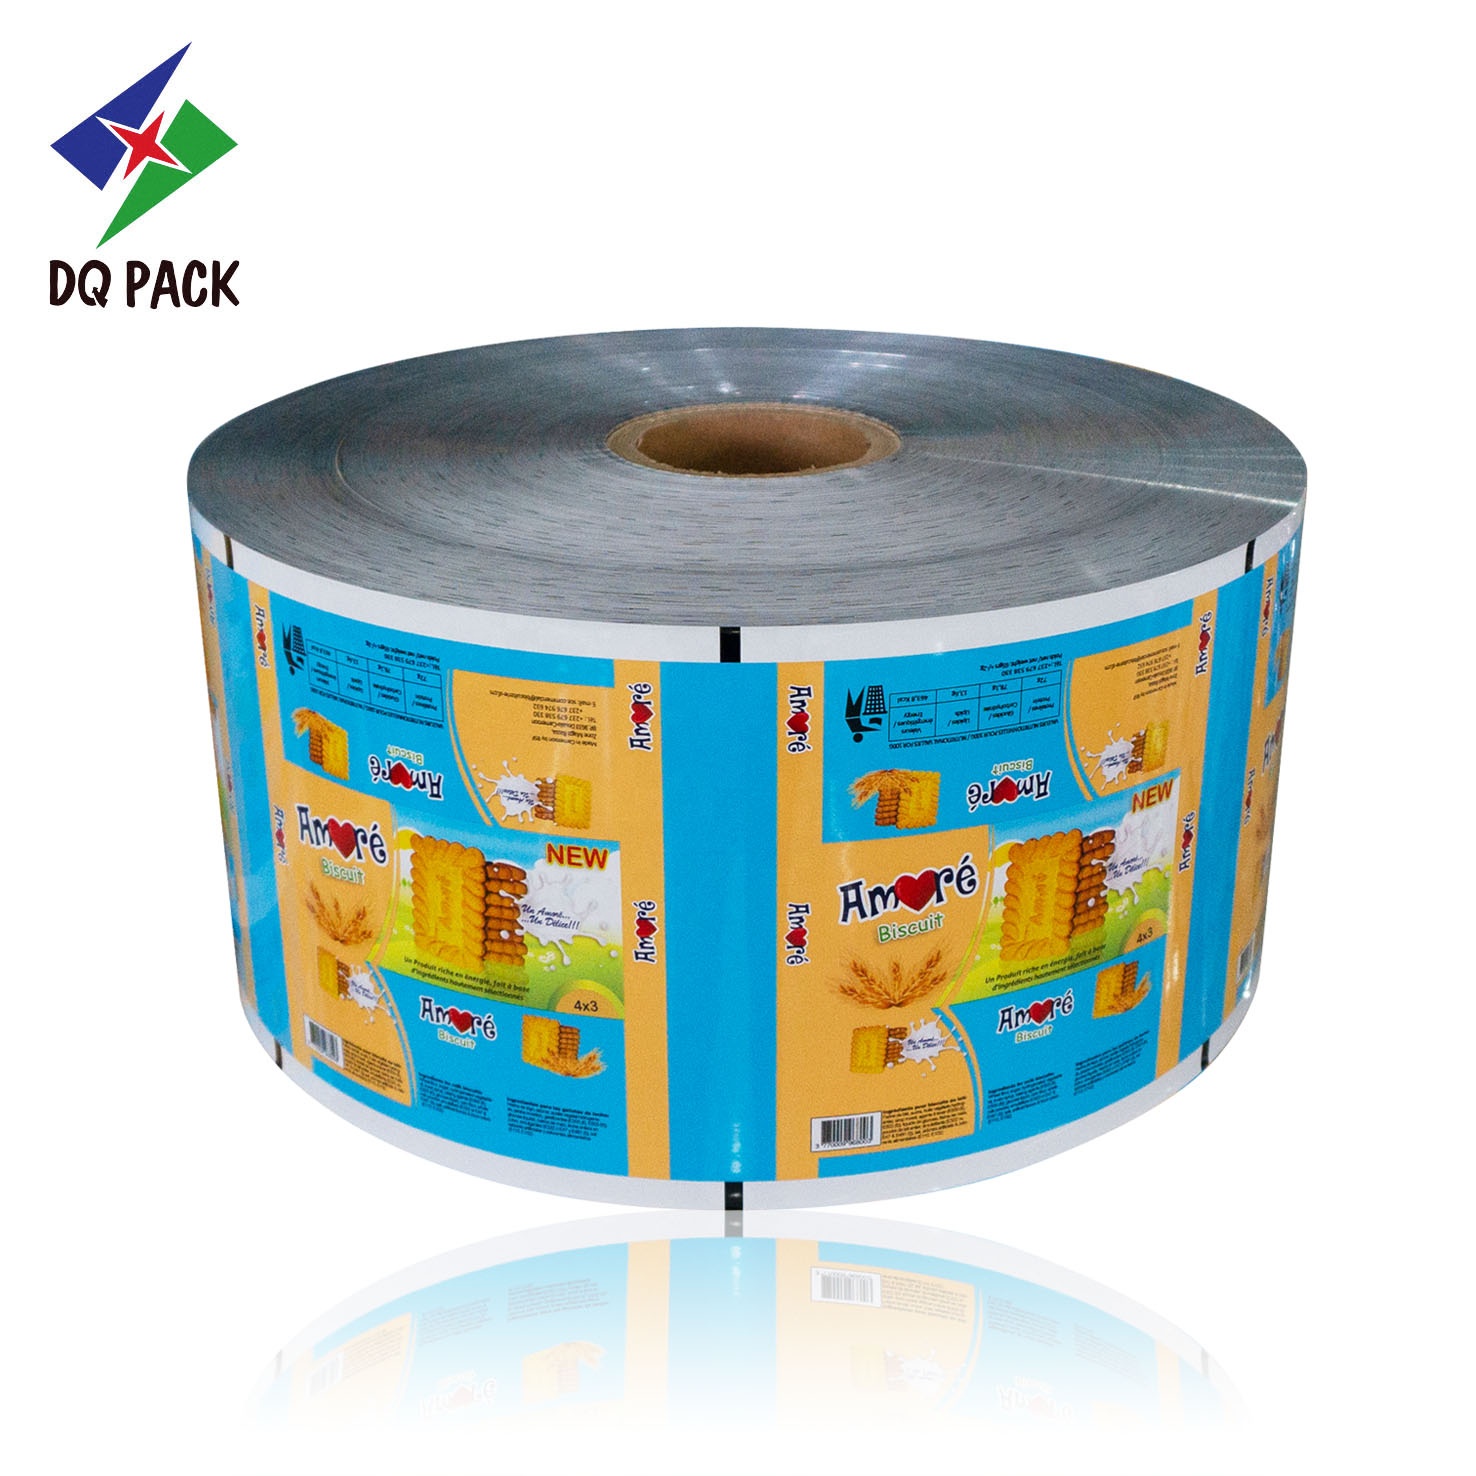 DQ PACK OPP Metalized Laminated Material Biscuit Film Roll Food Packaging